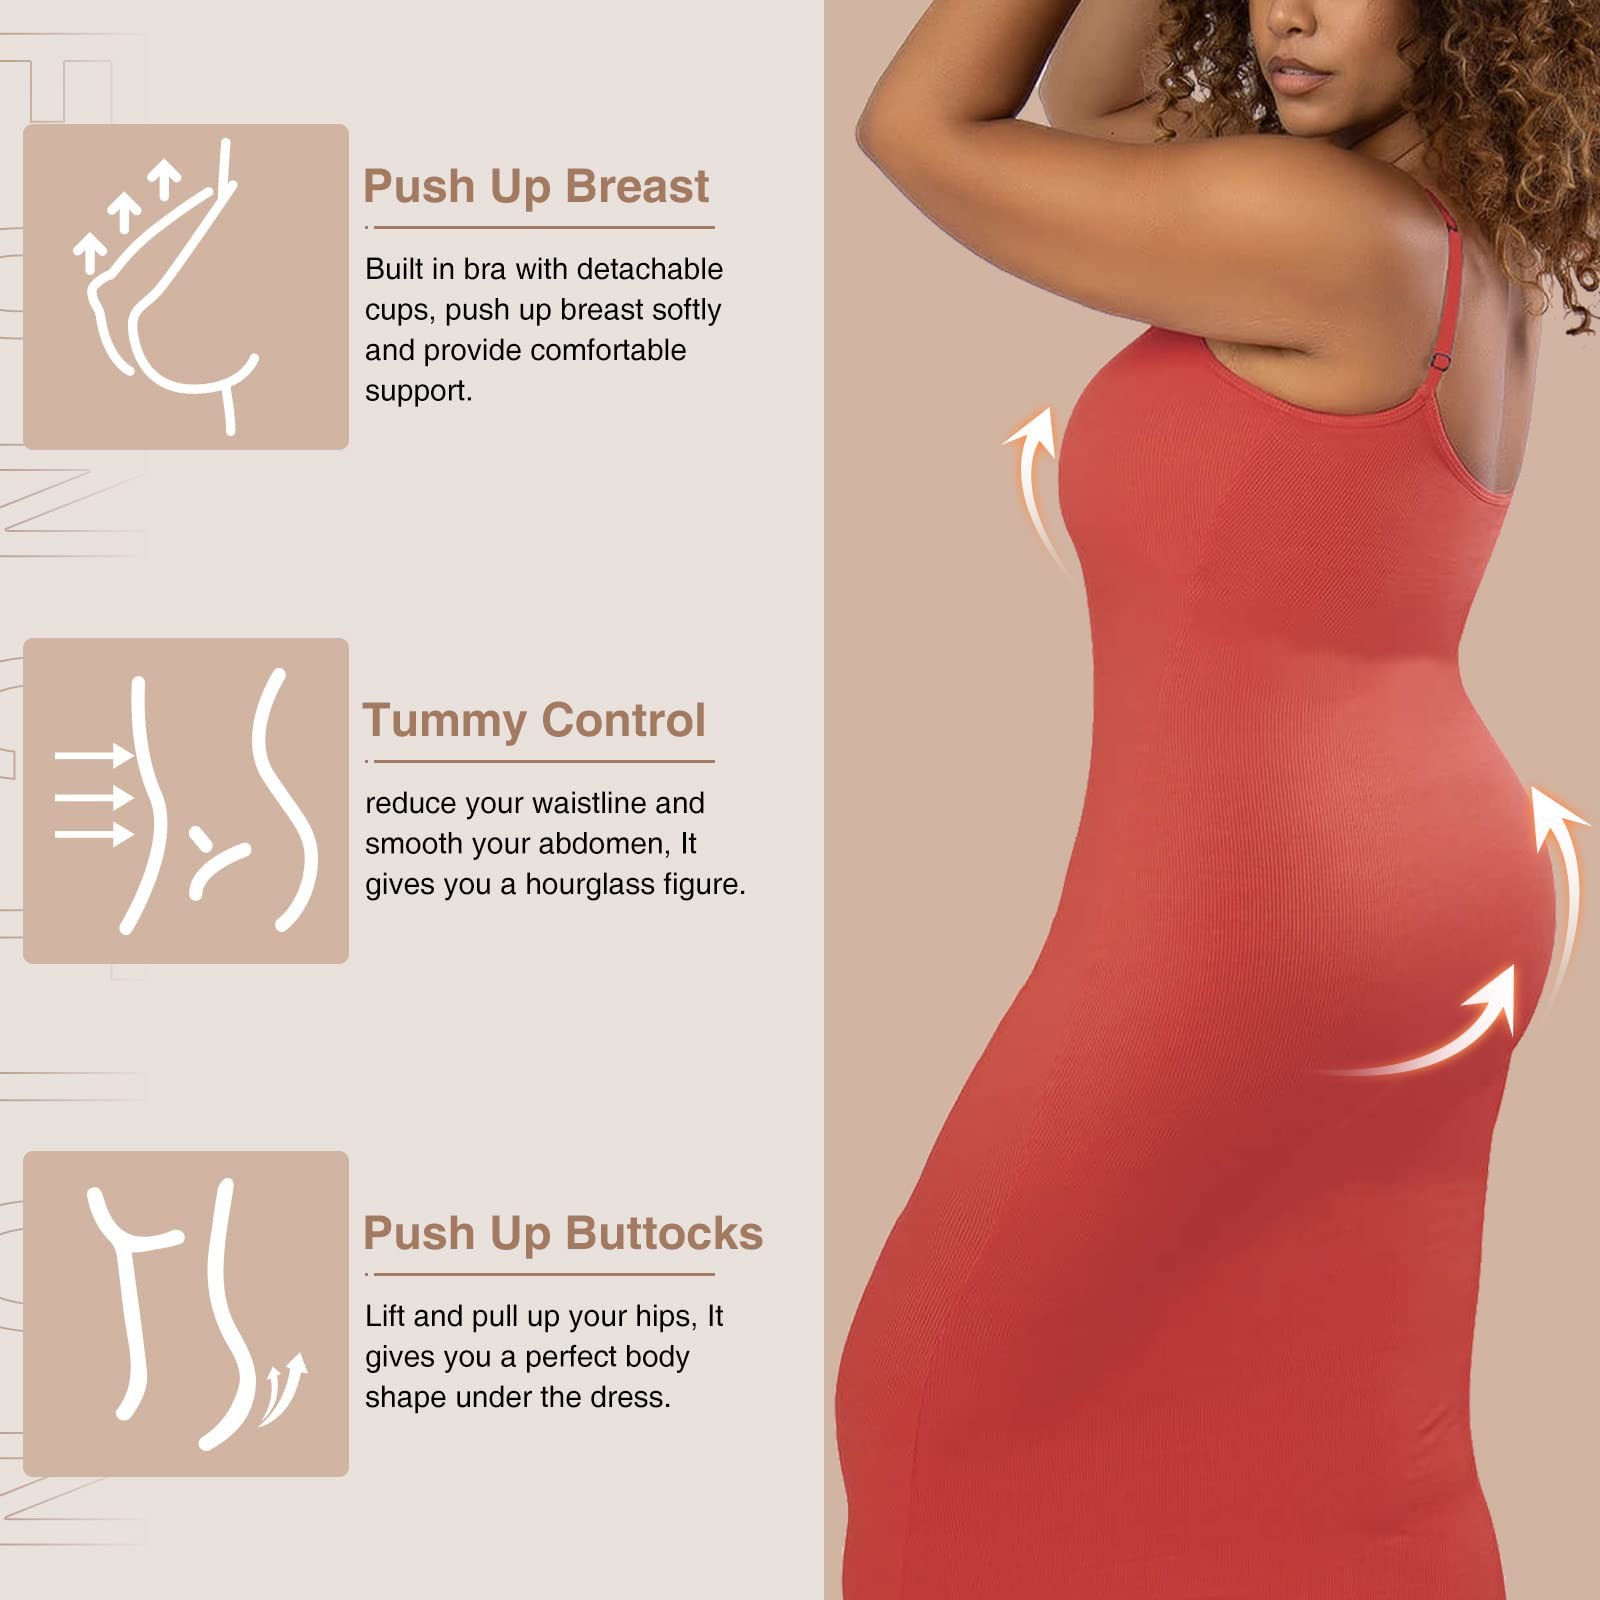 shapeminow 687bdd81 d315 4cc6 8515 64578535db11 | ShapeMiNow is your go-to store for all kinds of body shapers, dresses, and statement pieces.